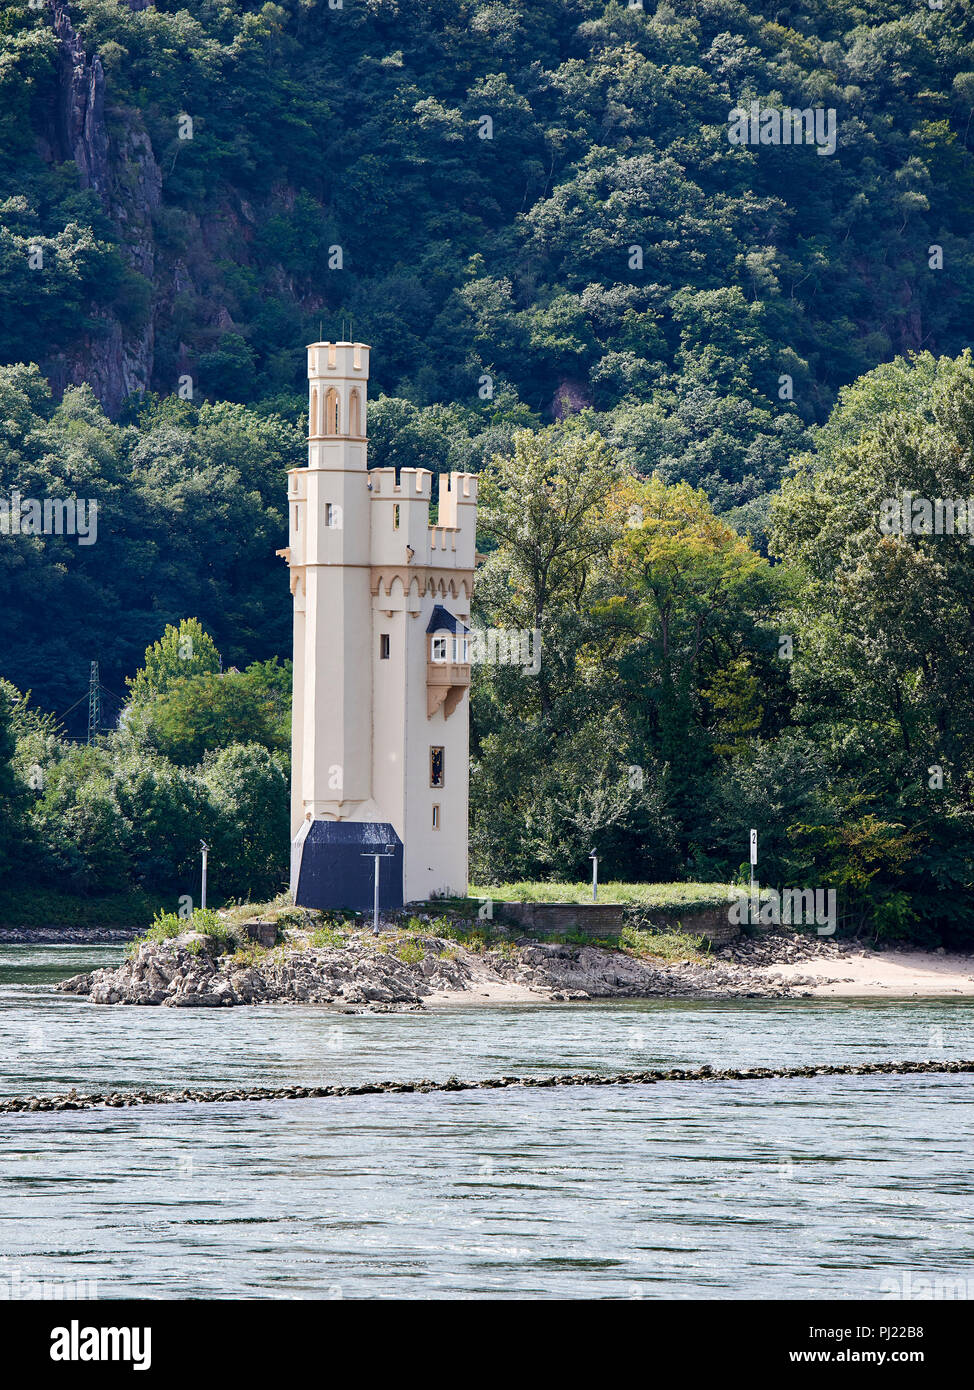 Mäuseturminsel on the river Rhine, showing the Mäuse (Mouse) Tower Stock Photo